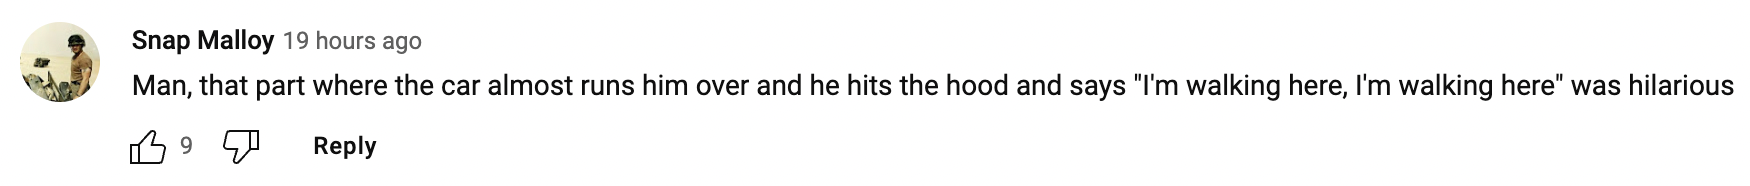 Indiana jones youtube comments - 'Indiana Jones and the Dial of Destiny' Trailer comments - an, that part where the car almost runs him over and he hits the hood and says